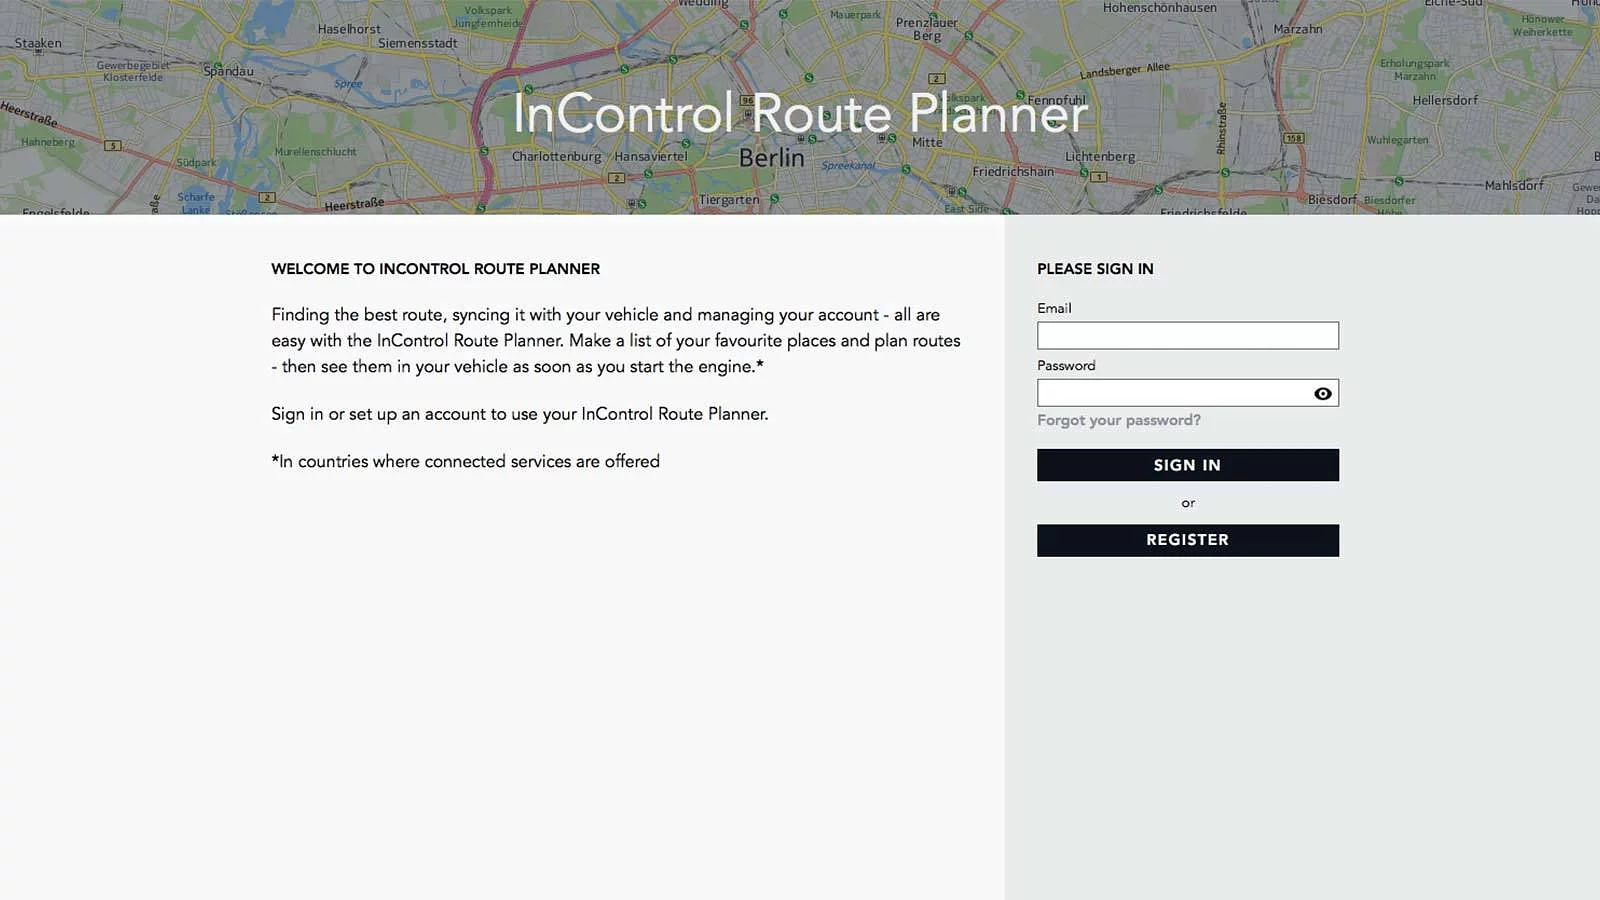 ACCESSING INCONTROL ROUTE PLANNER